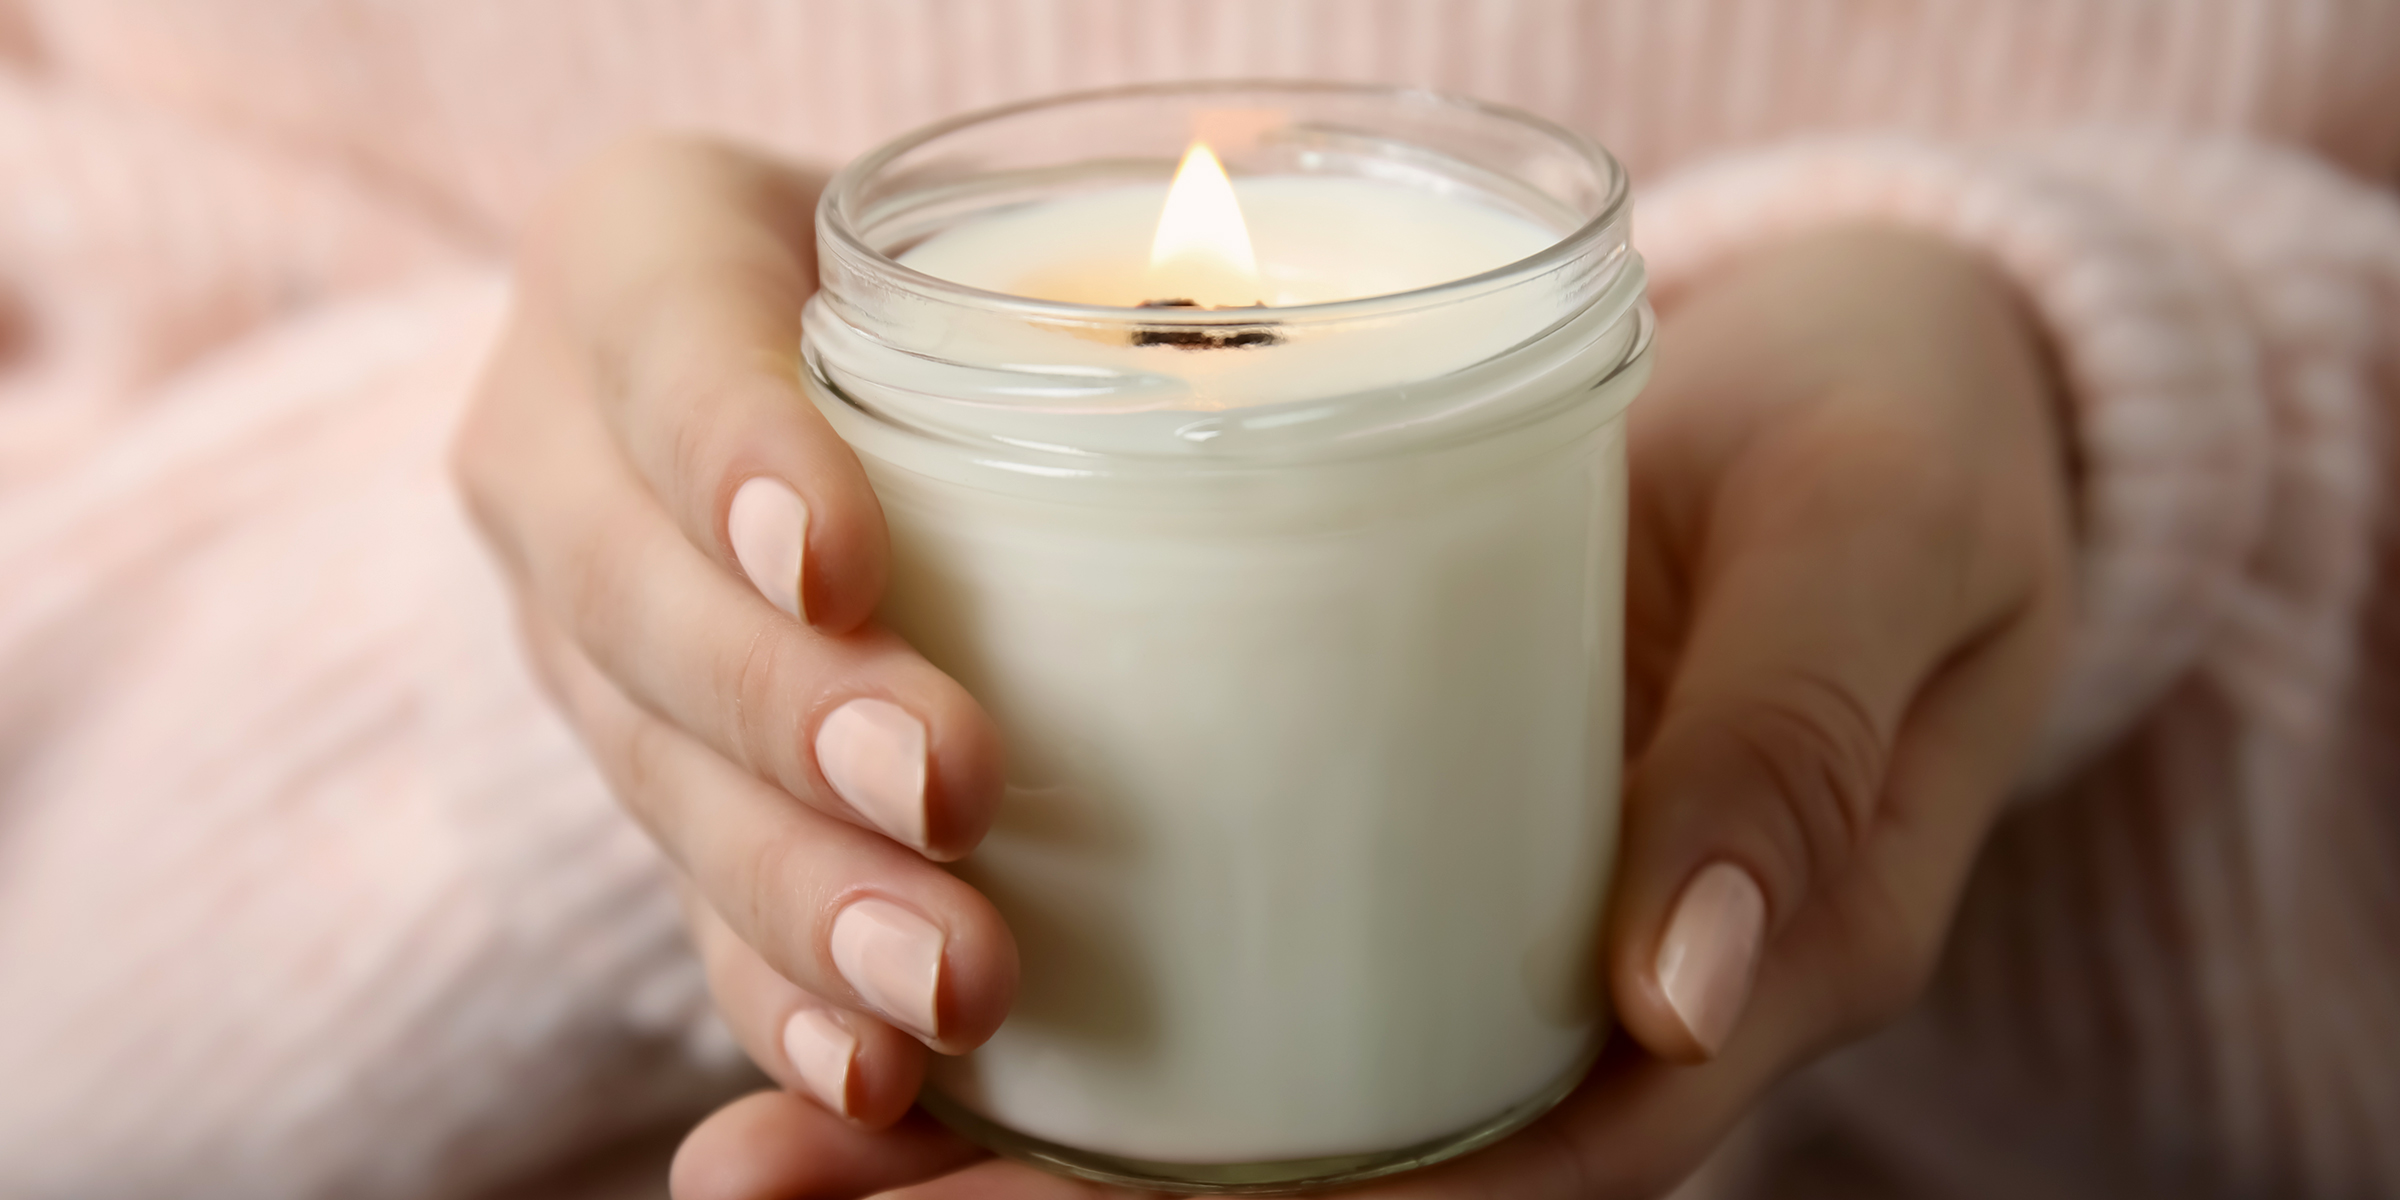 A scented candle | Source: Shutterstock